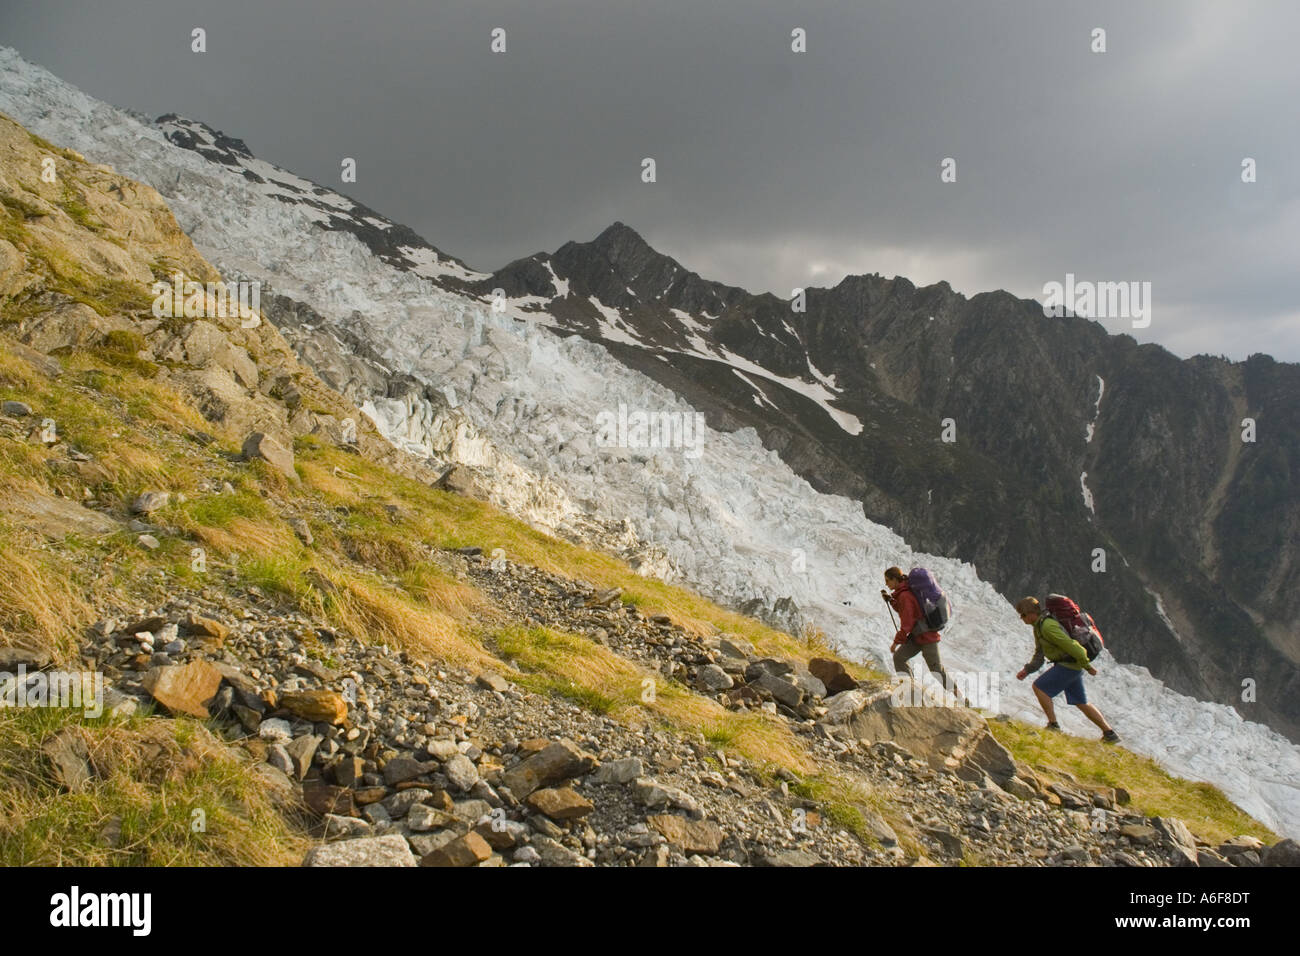 A couple hiking next to a glacier in the French Alps near Chamonix Stock Photo